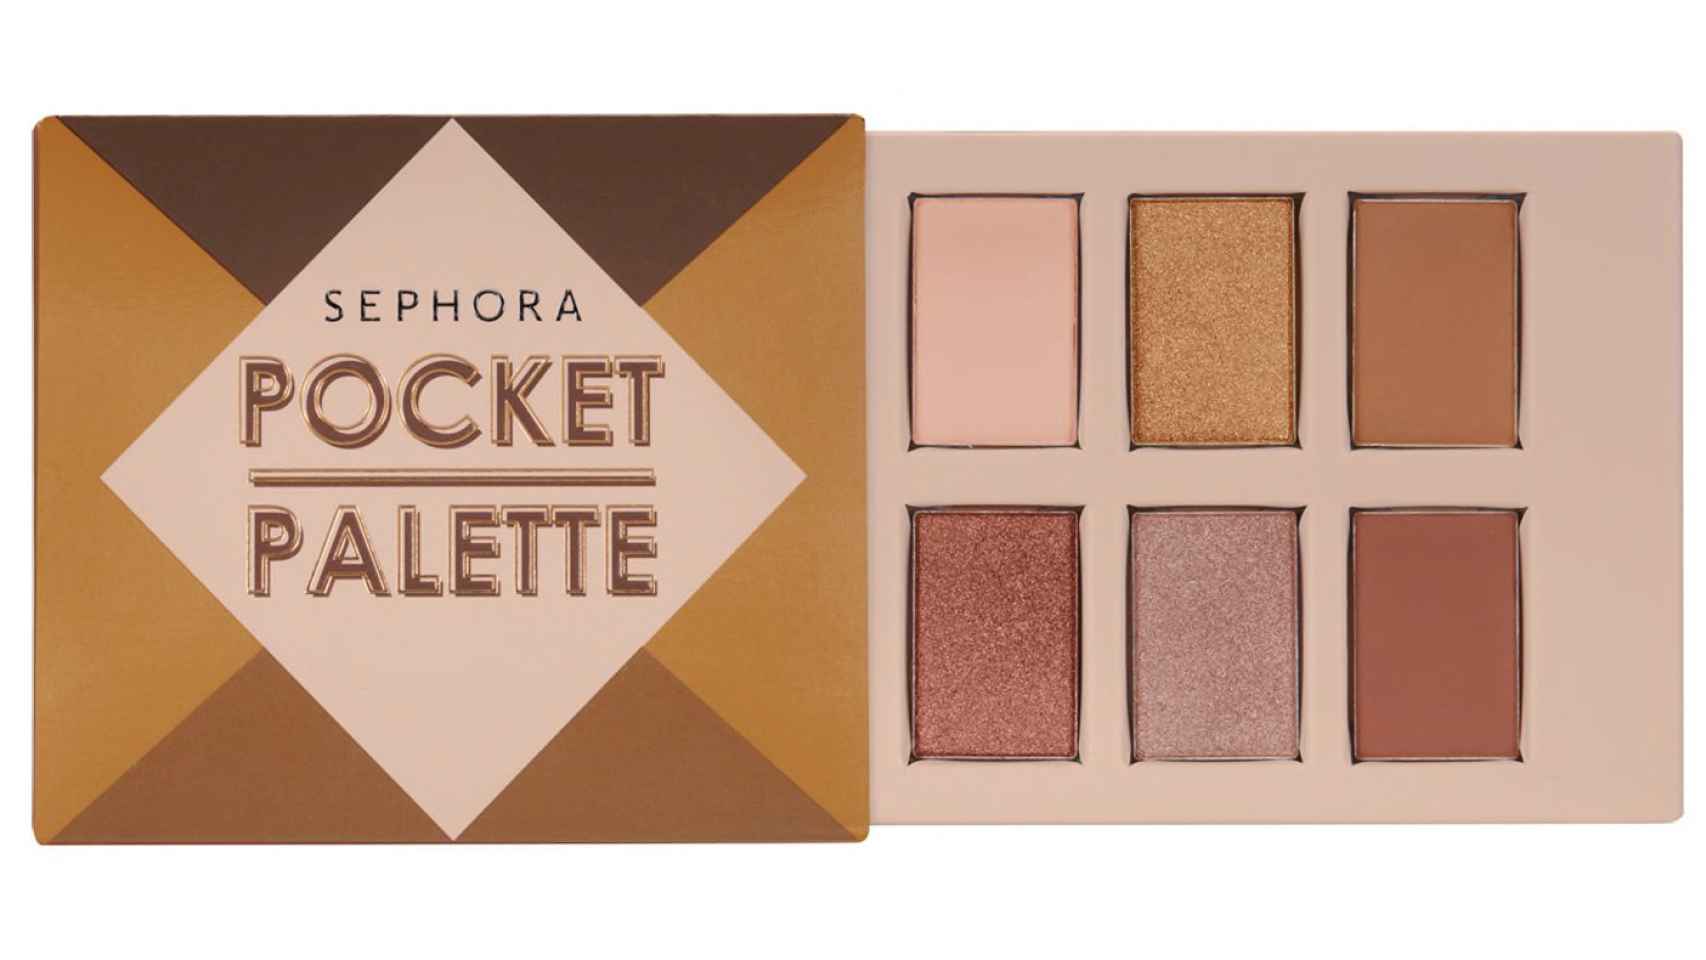 Pocket Palette SephoraCollection.